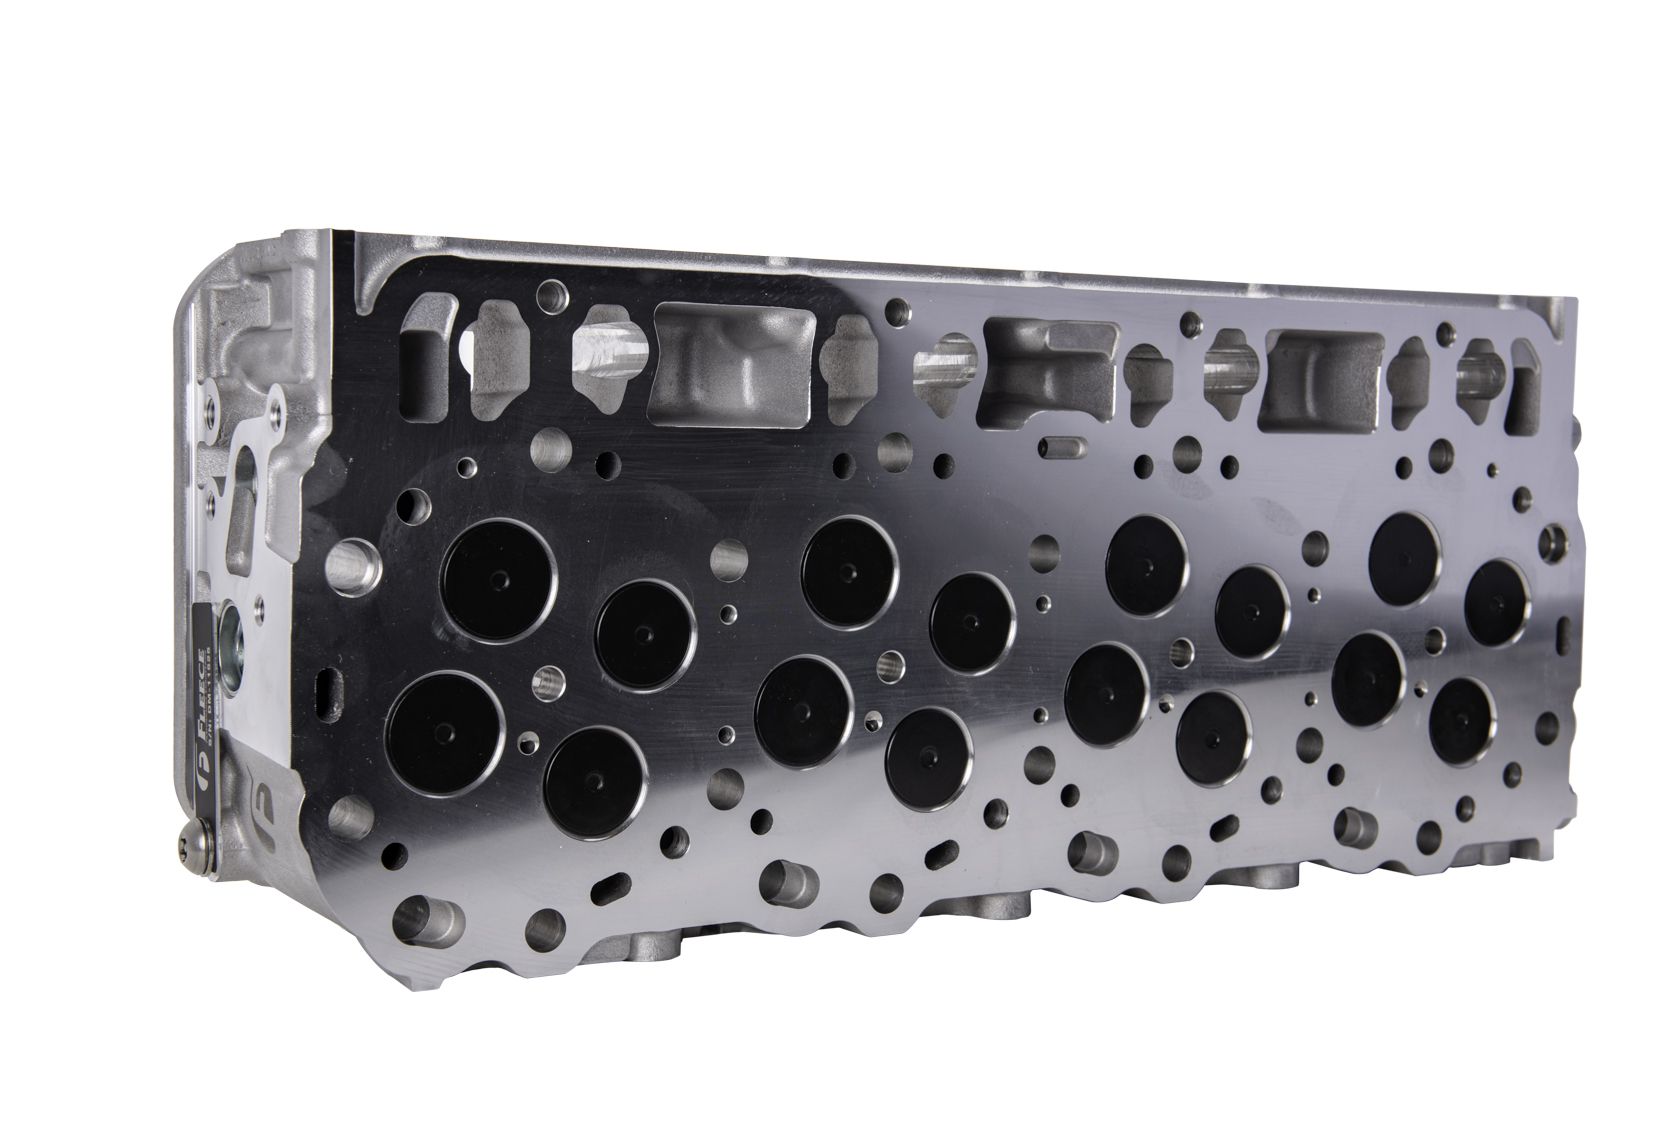 FPE-61-10001-D-CL Fleece / Freedom Series Duramax Cylinder Head with Cupless Injector Bore for 2001-2004 LB7 (Passenger Side) Hell On Wheels Canada